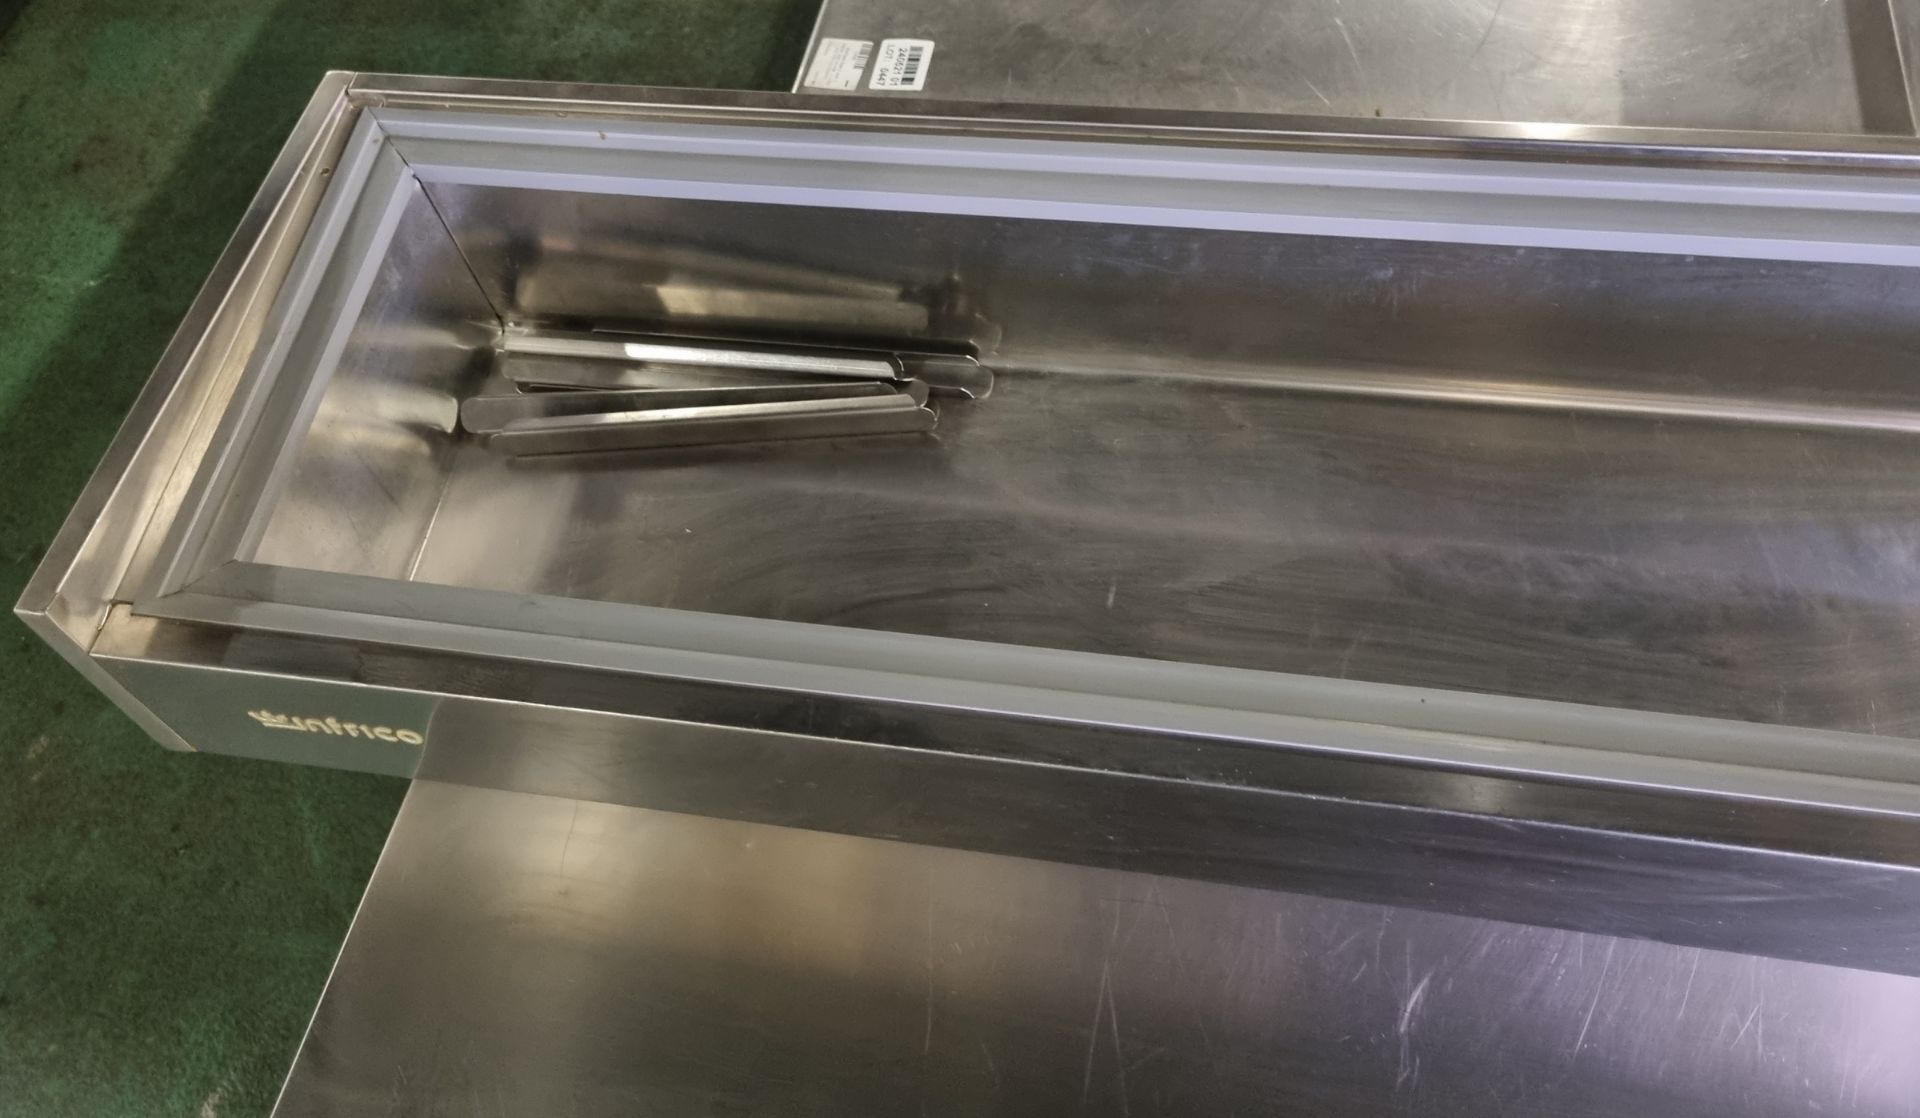 Infrico VIP1980T stainless steel countertop salad prep unit - L 1980 x D 360 x H 260mm - MISSING LID - Image 2 of 5